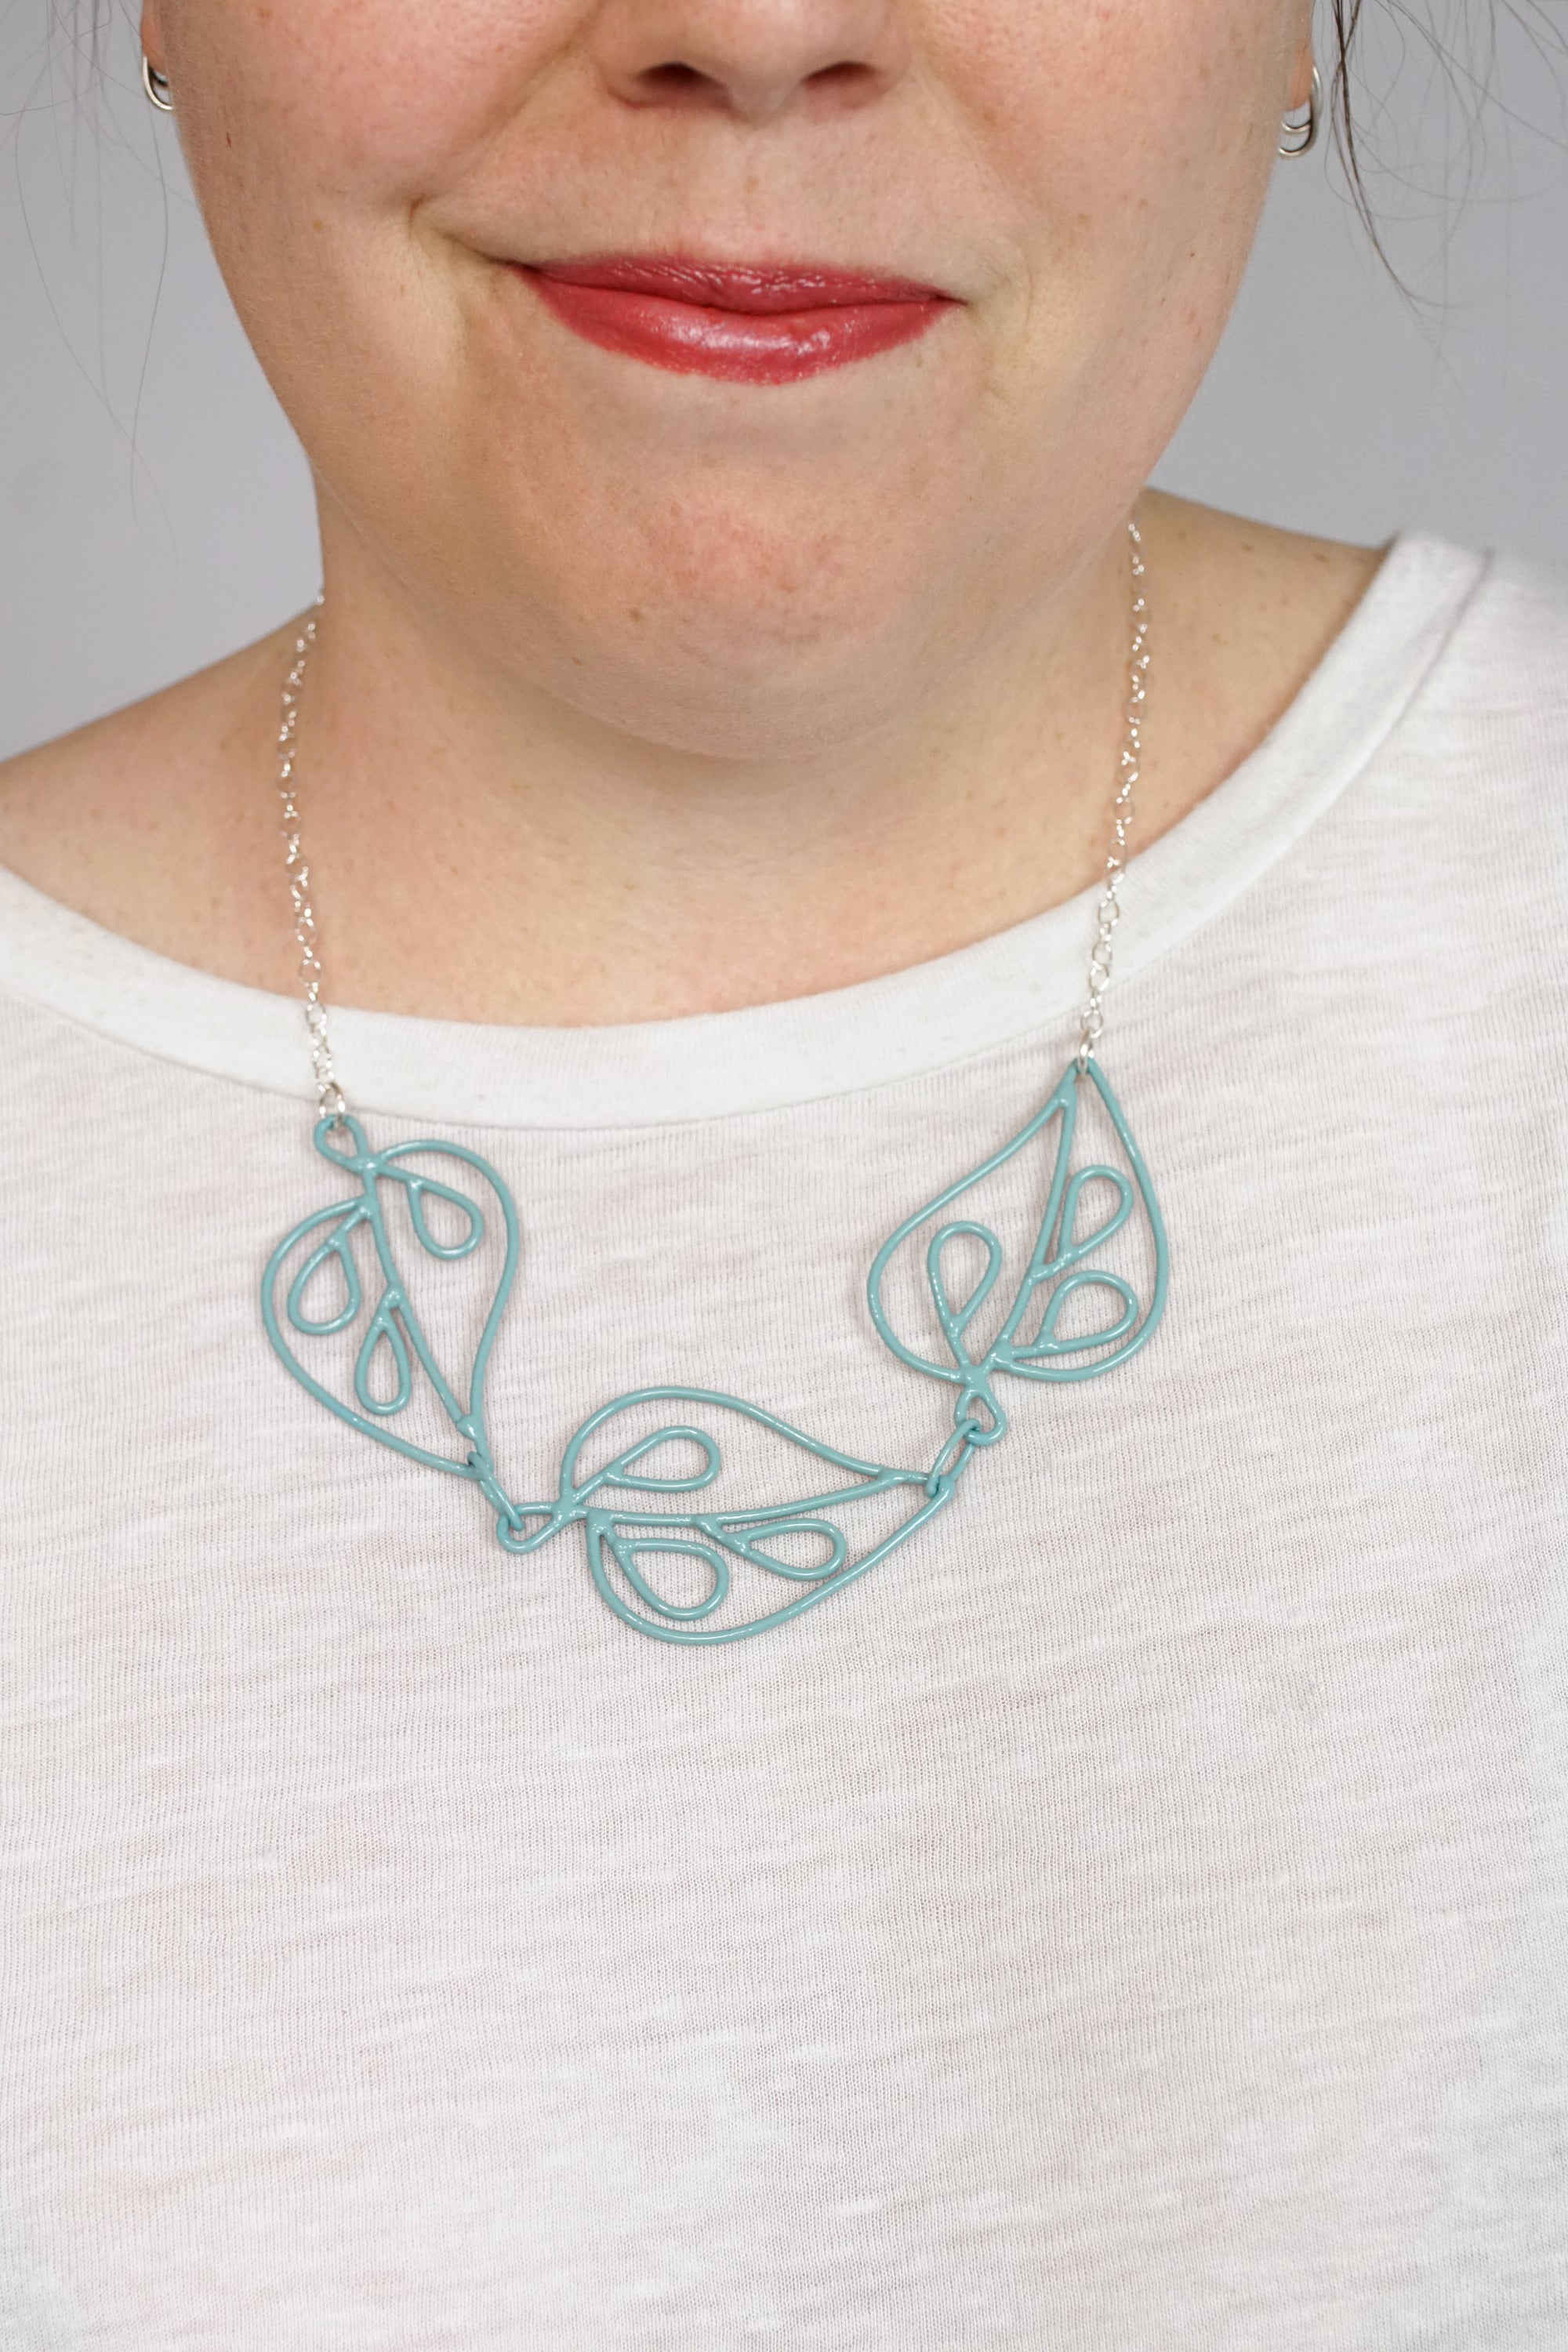 Ada Petite Triple Necklace in Faded Teal